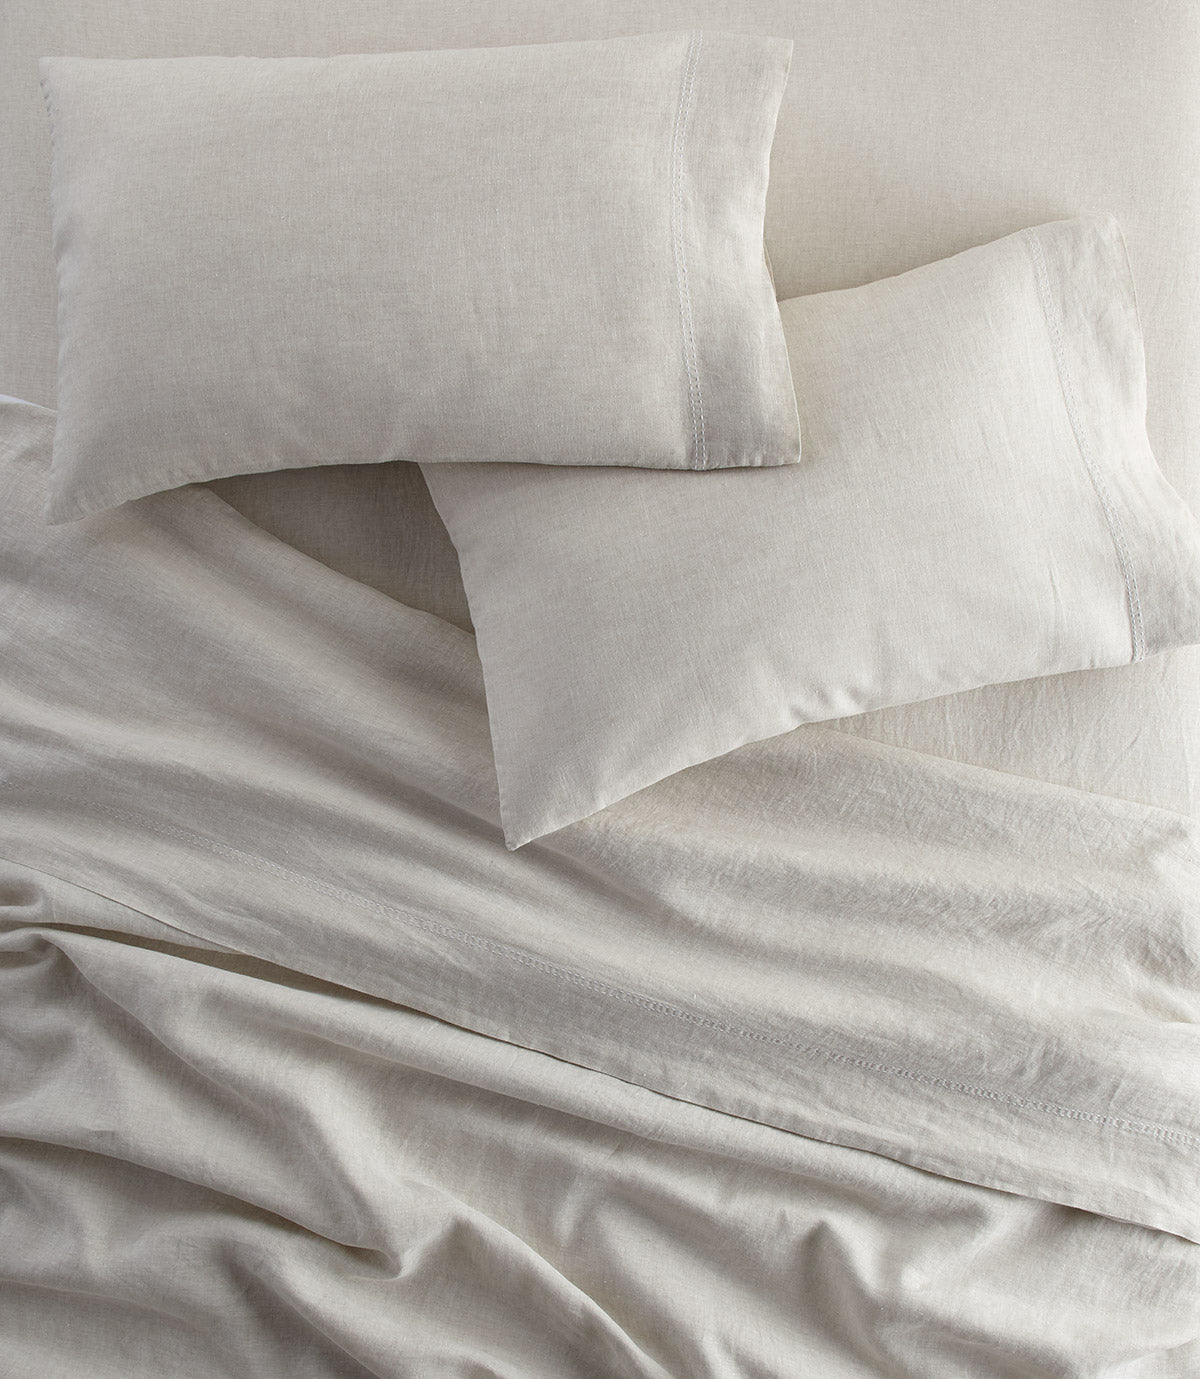 European Washed Linen Pillowcases and sheets on bed, Natural